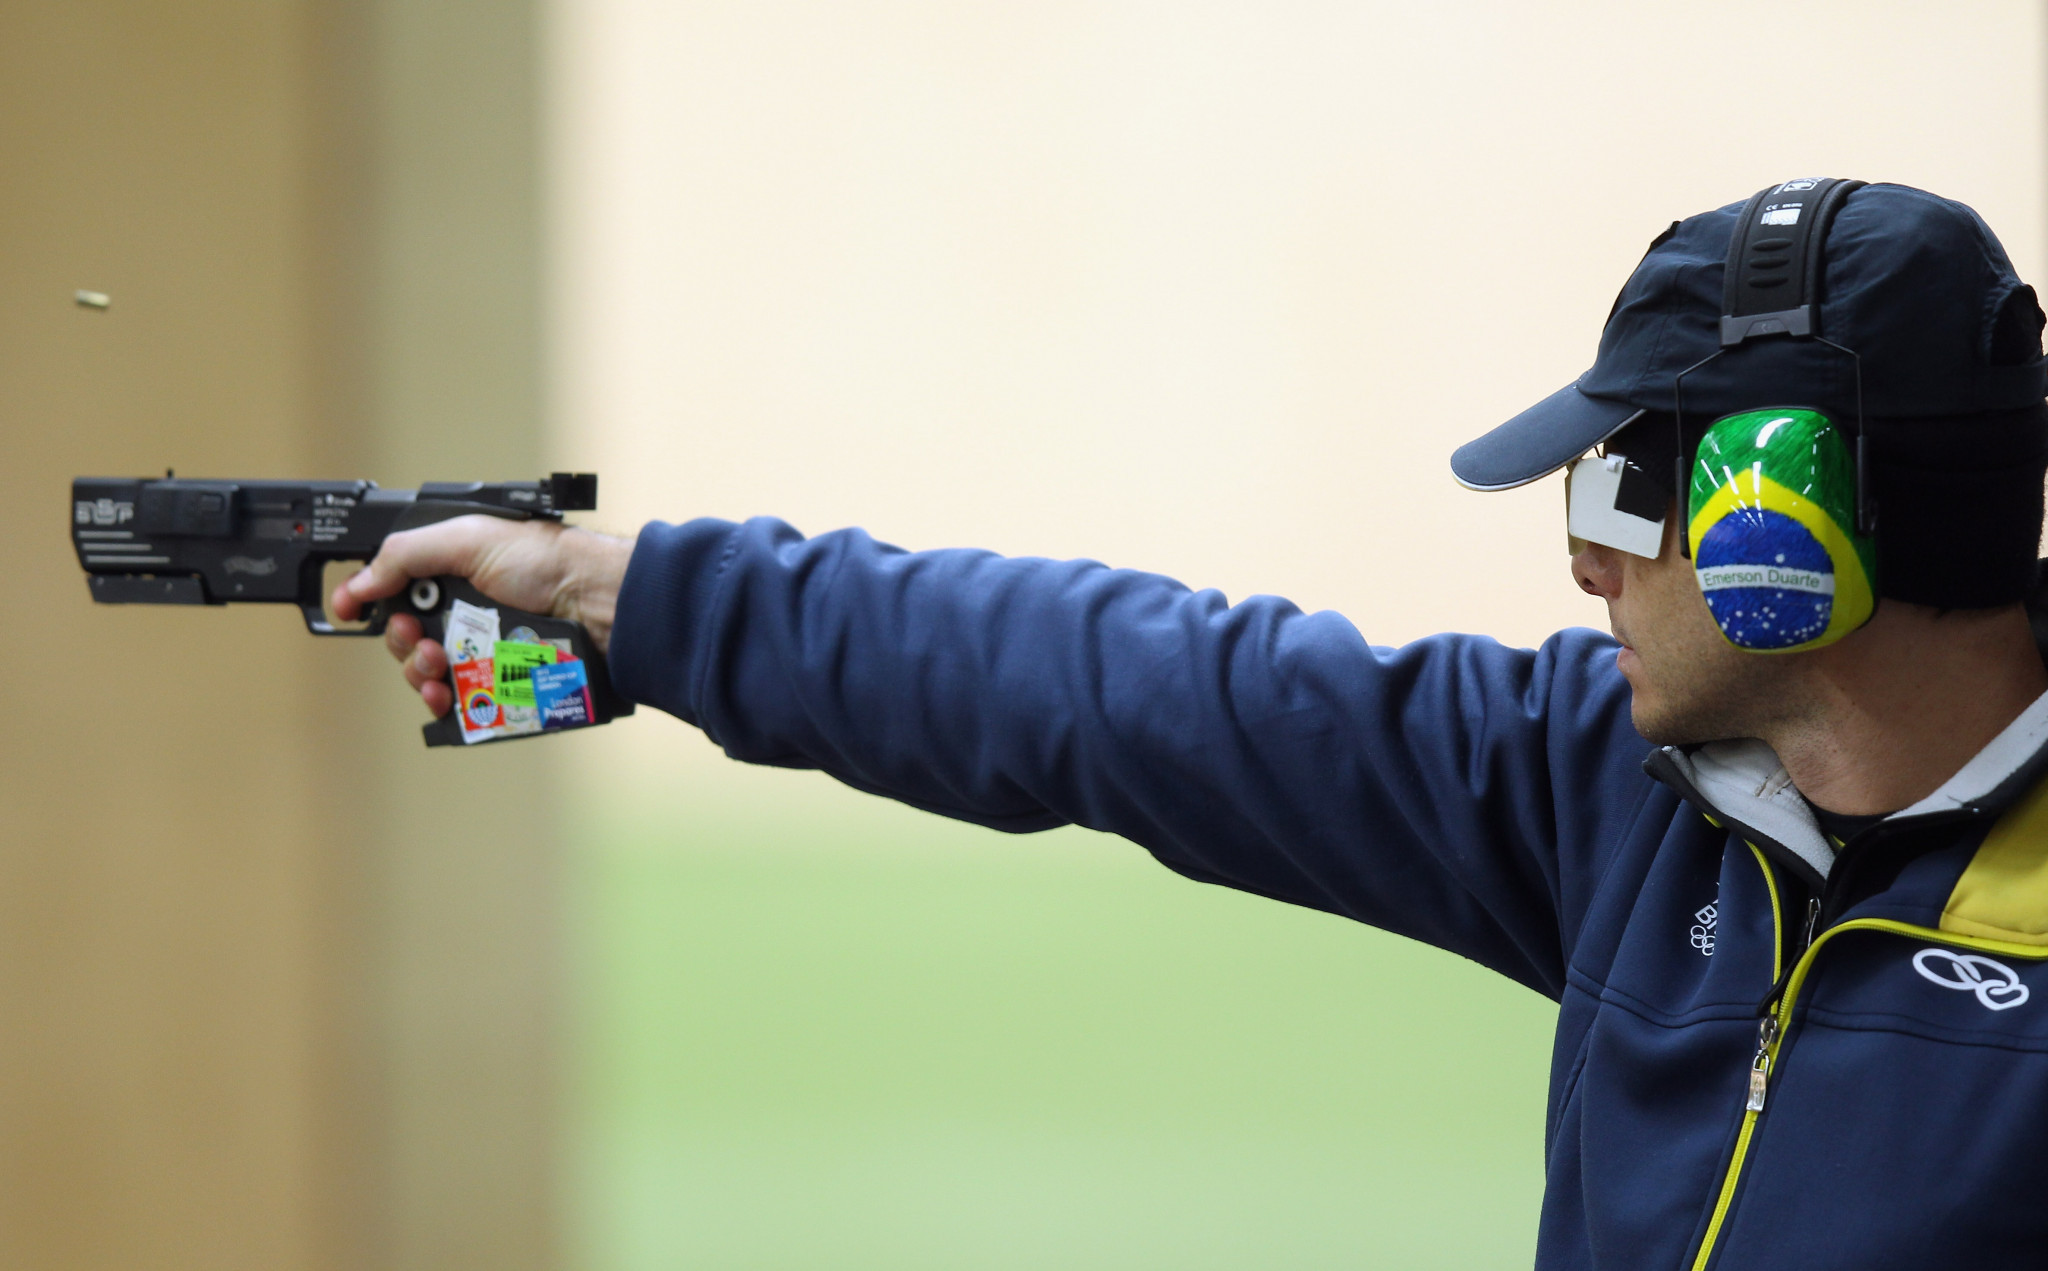 Brazilian and British teams in quarantine ahead of spectator-free ISSF World Cup in New Delhi